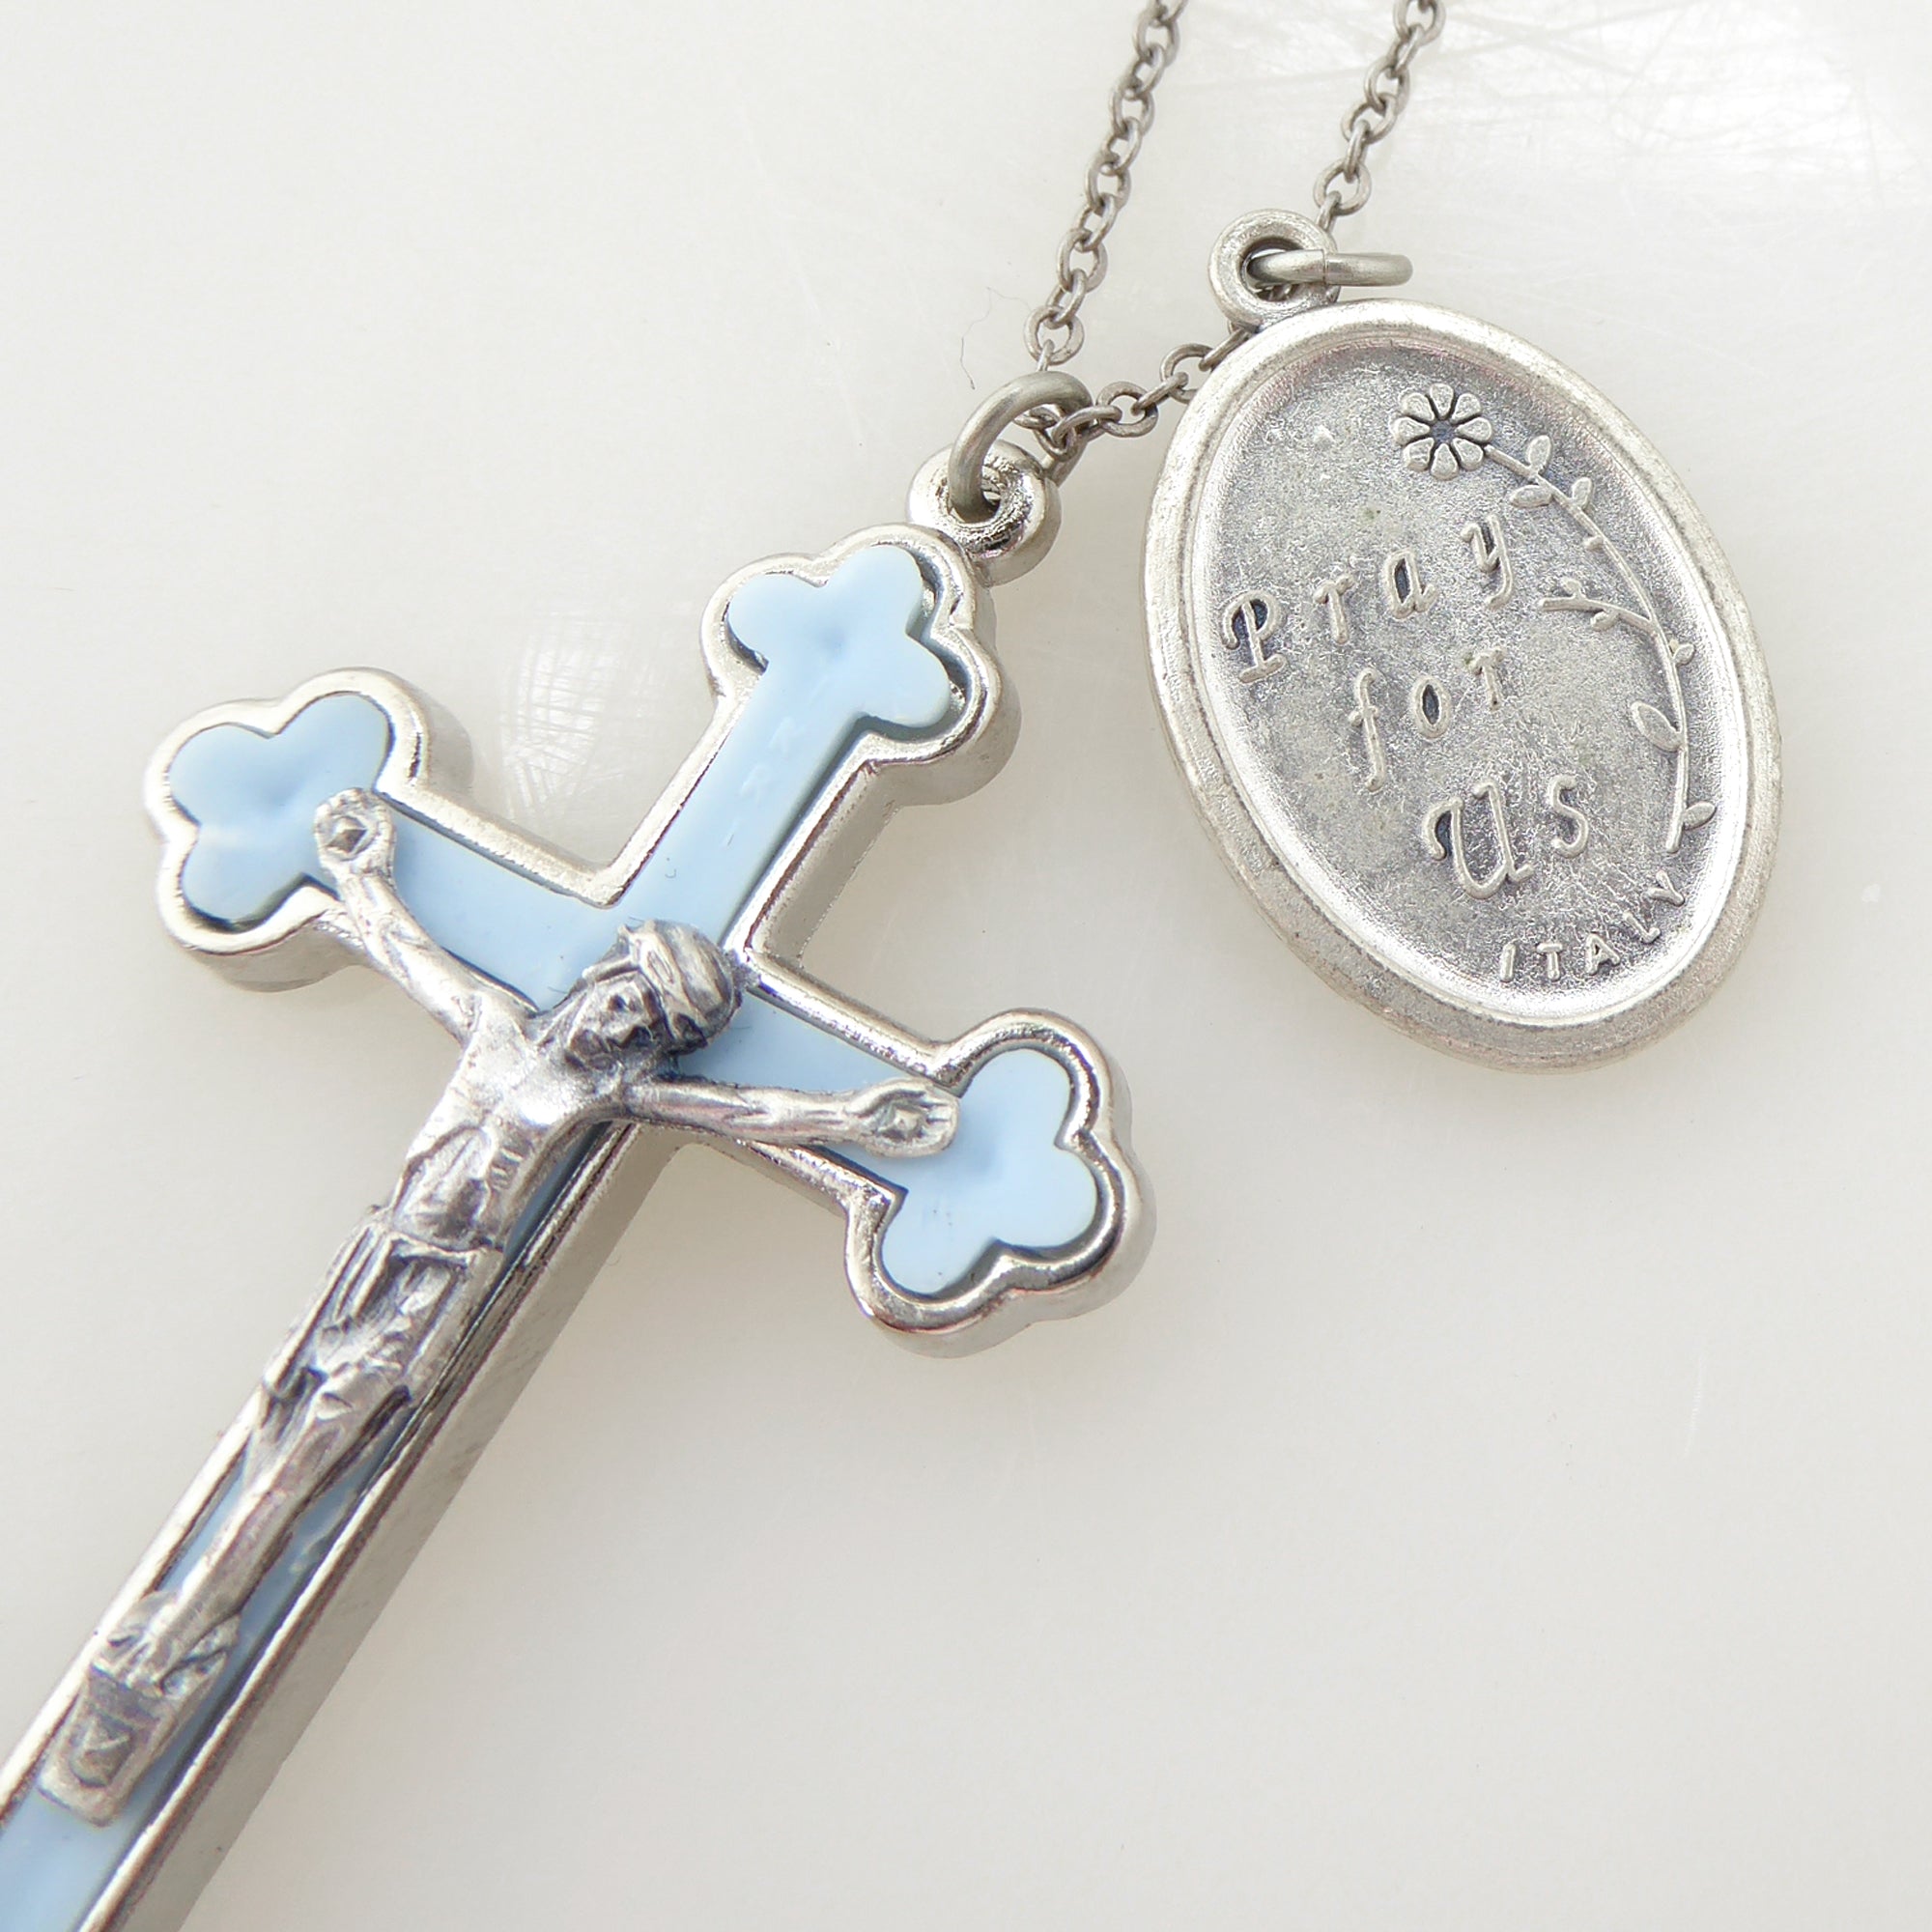 Blue crucifix and medal necklace by Jenny Dayco 4